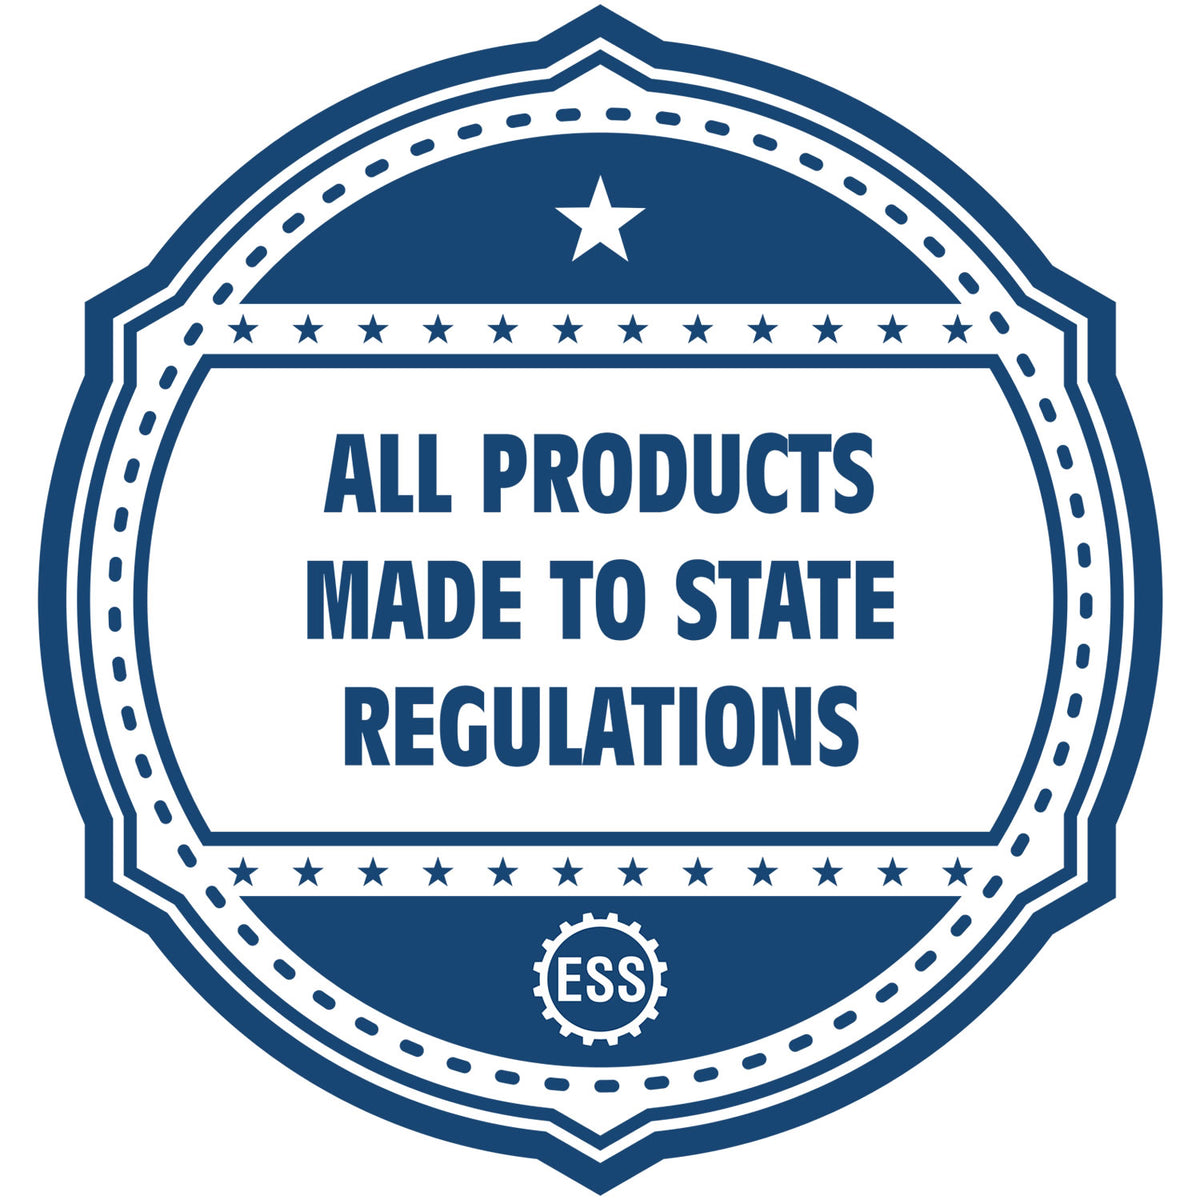 An icon or badge element for the State of Missouri Long Reach Architectural Embossing Seal showing that this product is made in compliance with state regulations.